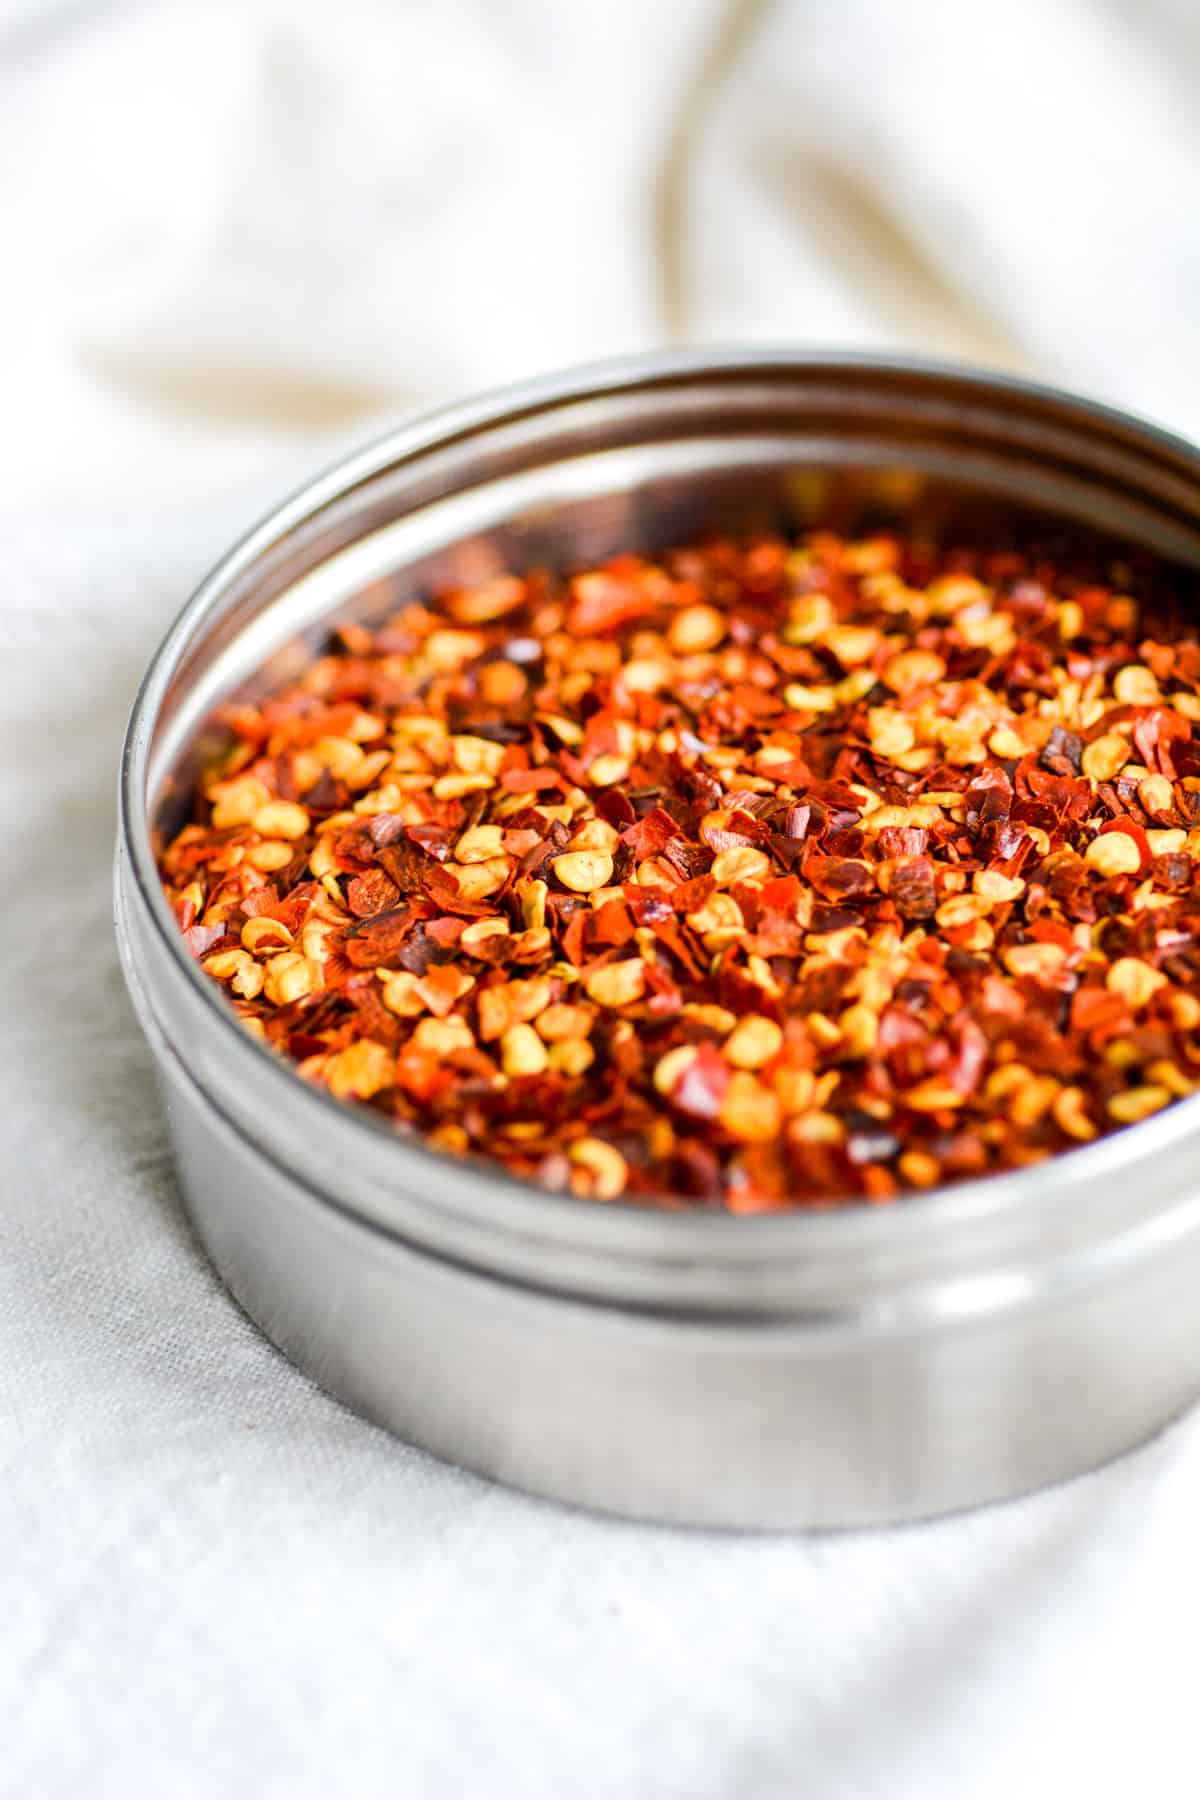 Crushed red pepper flakes in a metal container